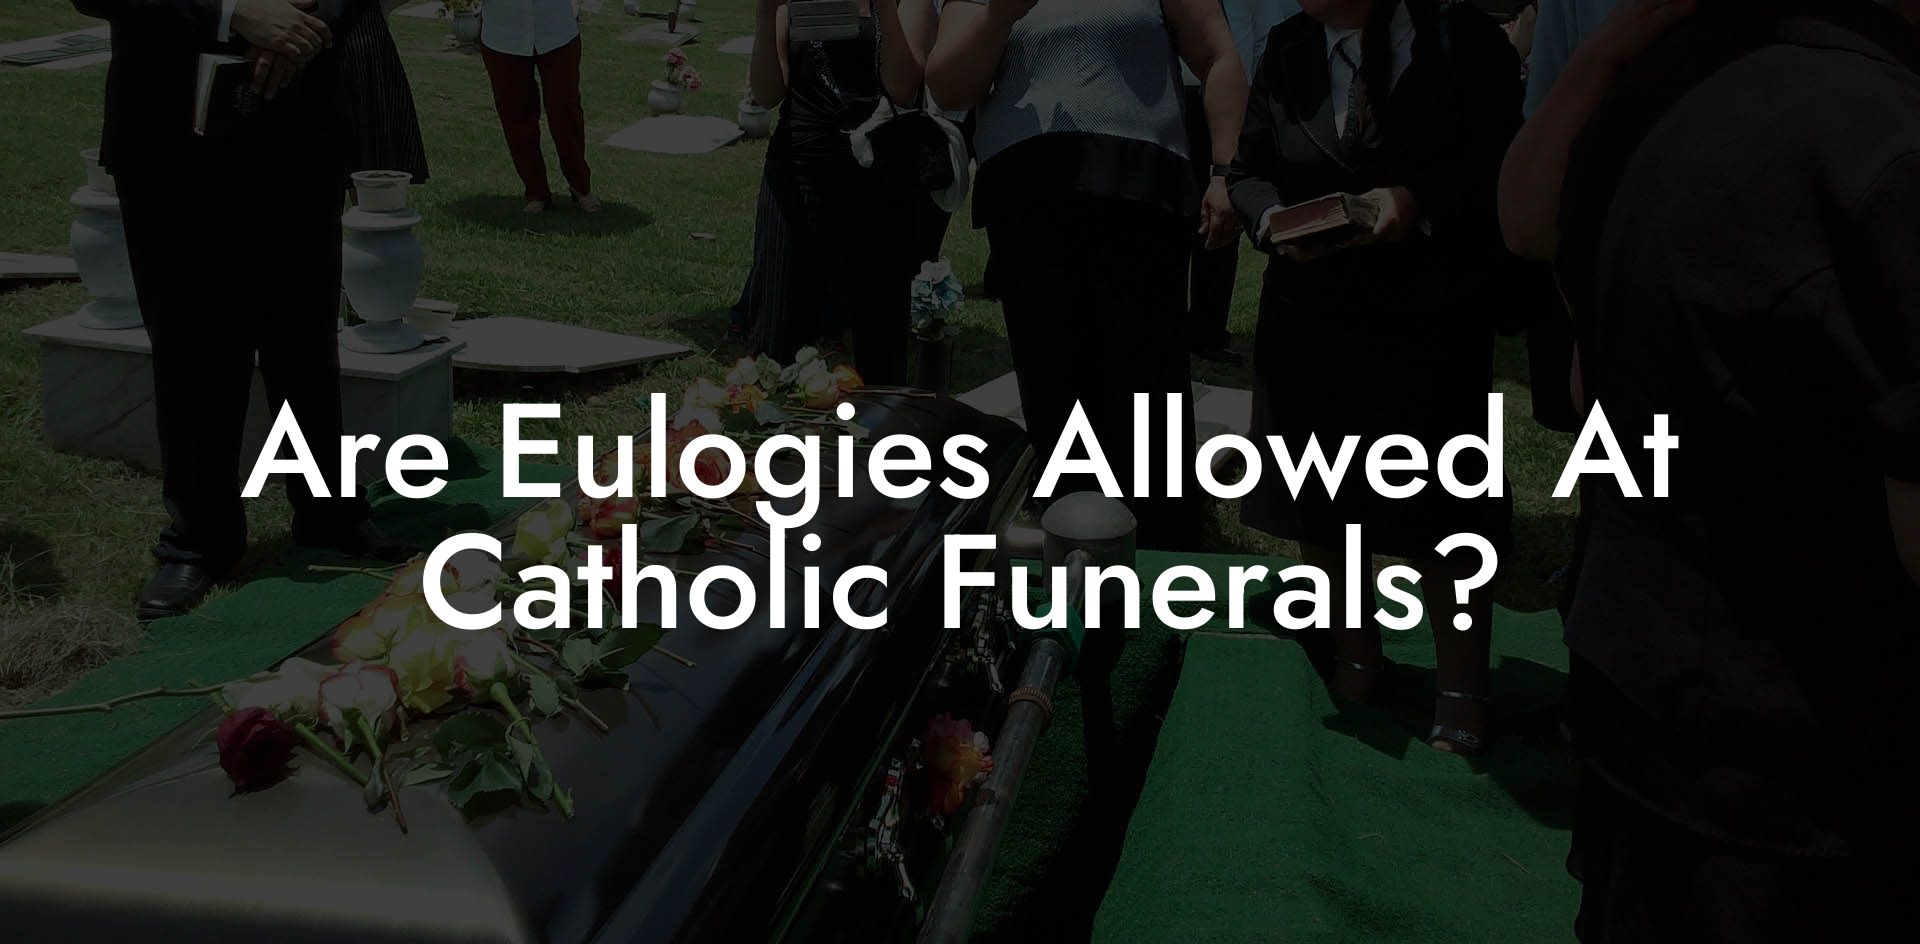 Are Eulogies Allowed At Catholic Funerals?